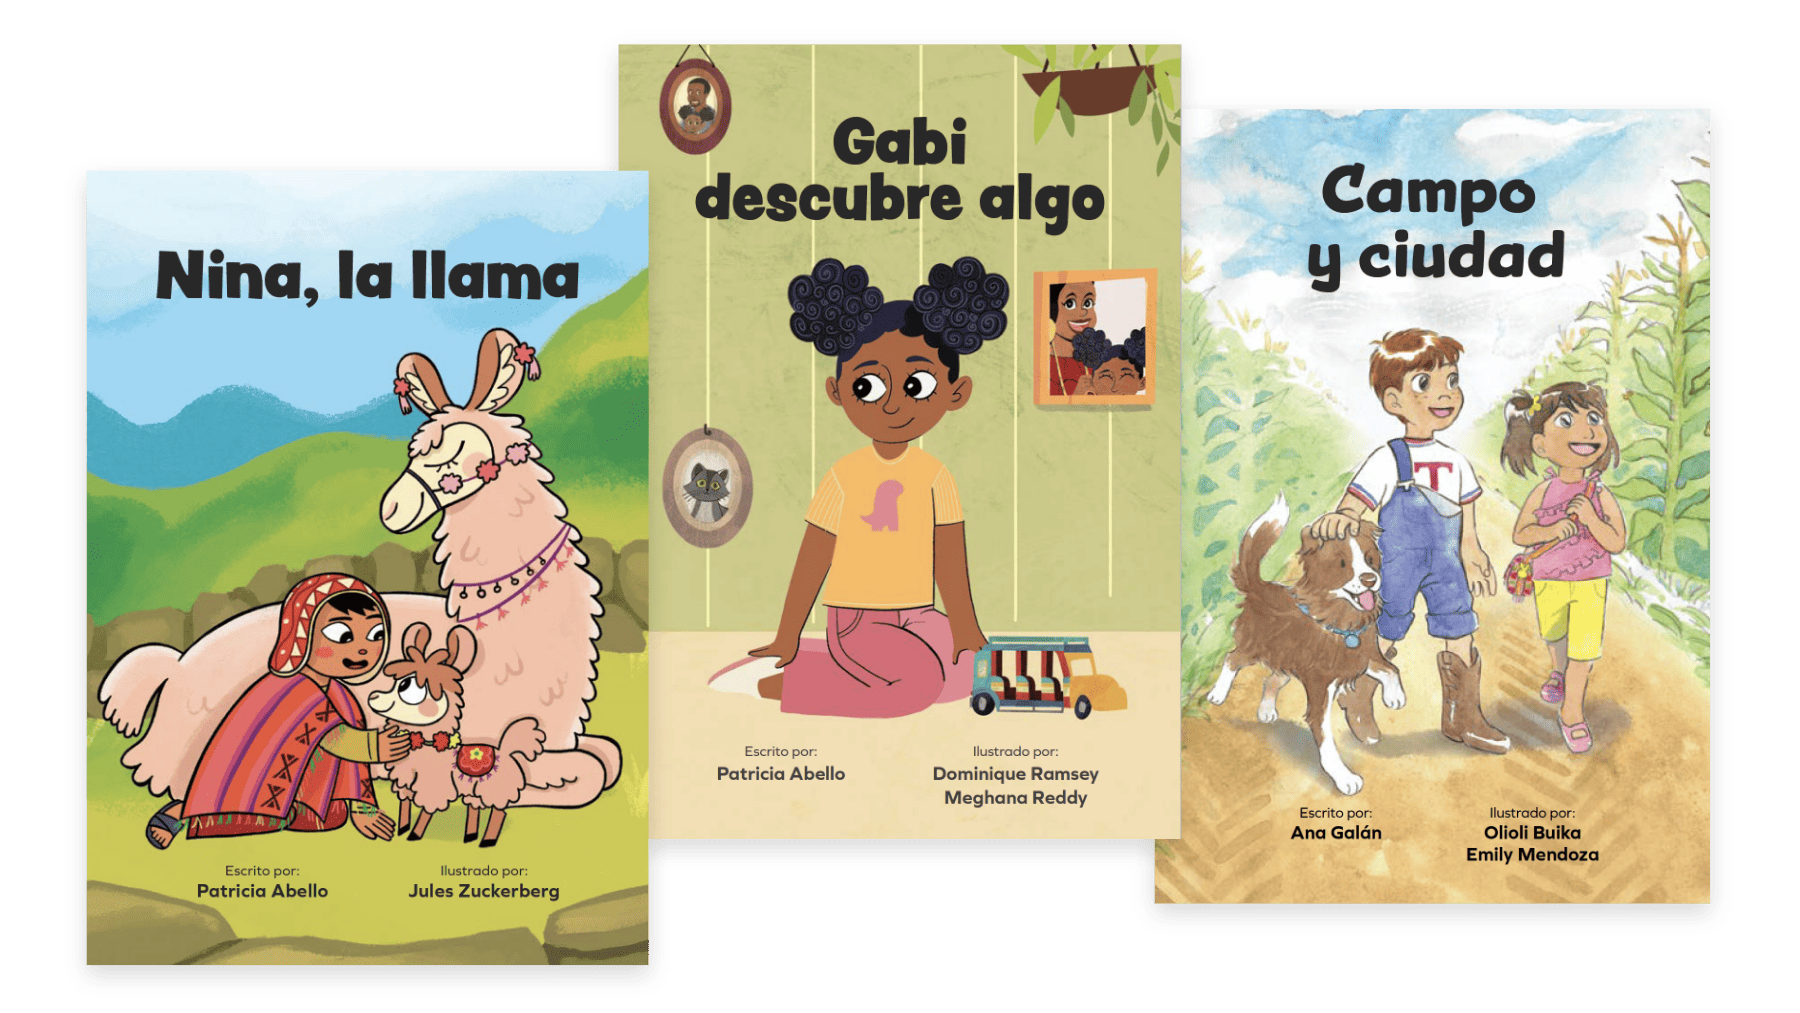 Three book covers in Spanish, featuring colorful illustrations of children with animals in varied settings: a llama, a dog, and both rural and urban backgrounds, ideal for the Core Knowledge Language Arts curriculum.